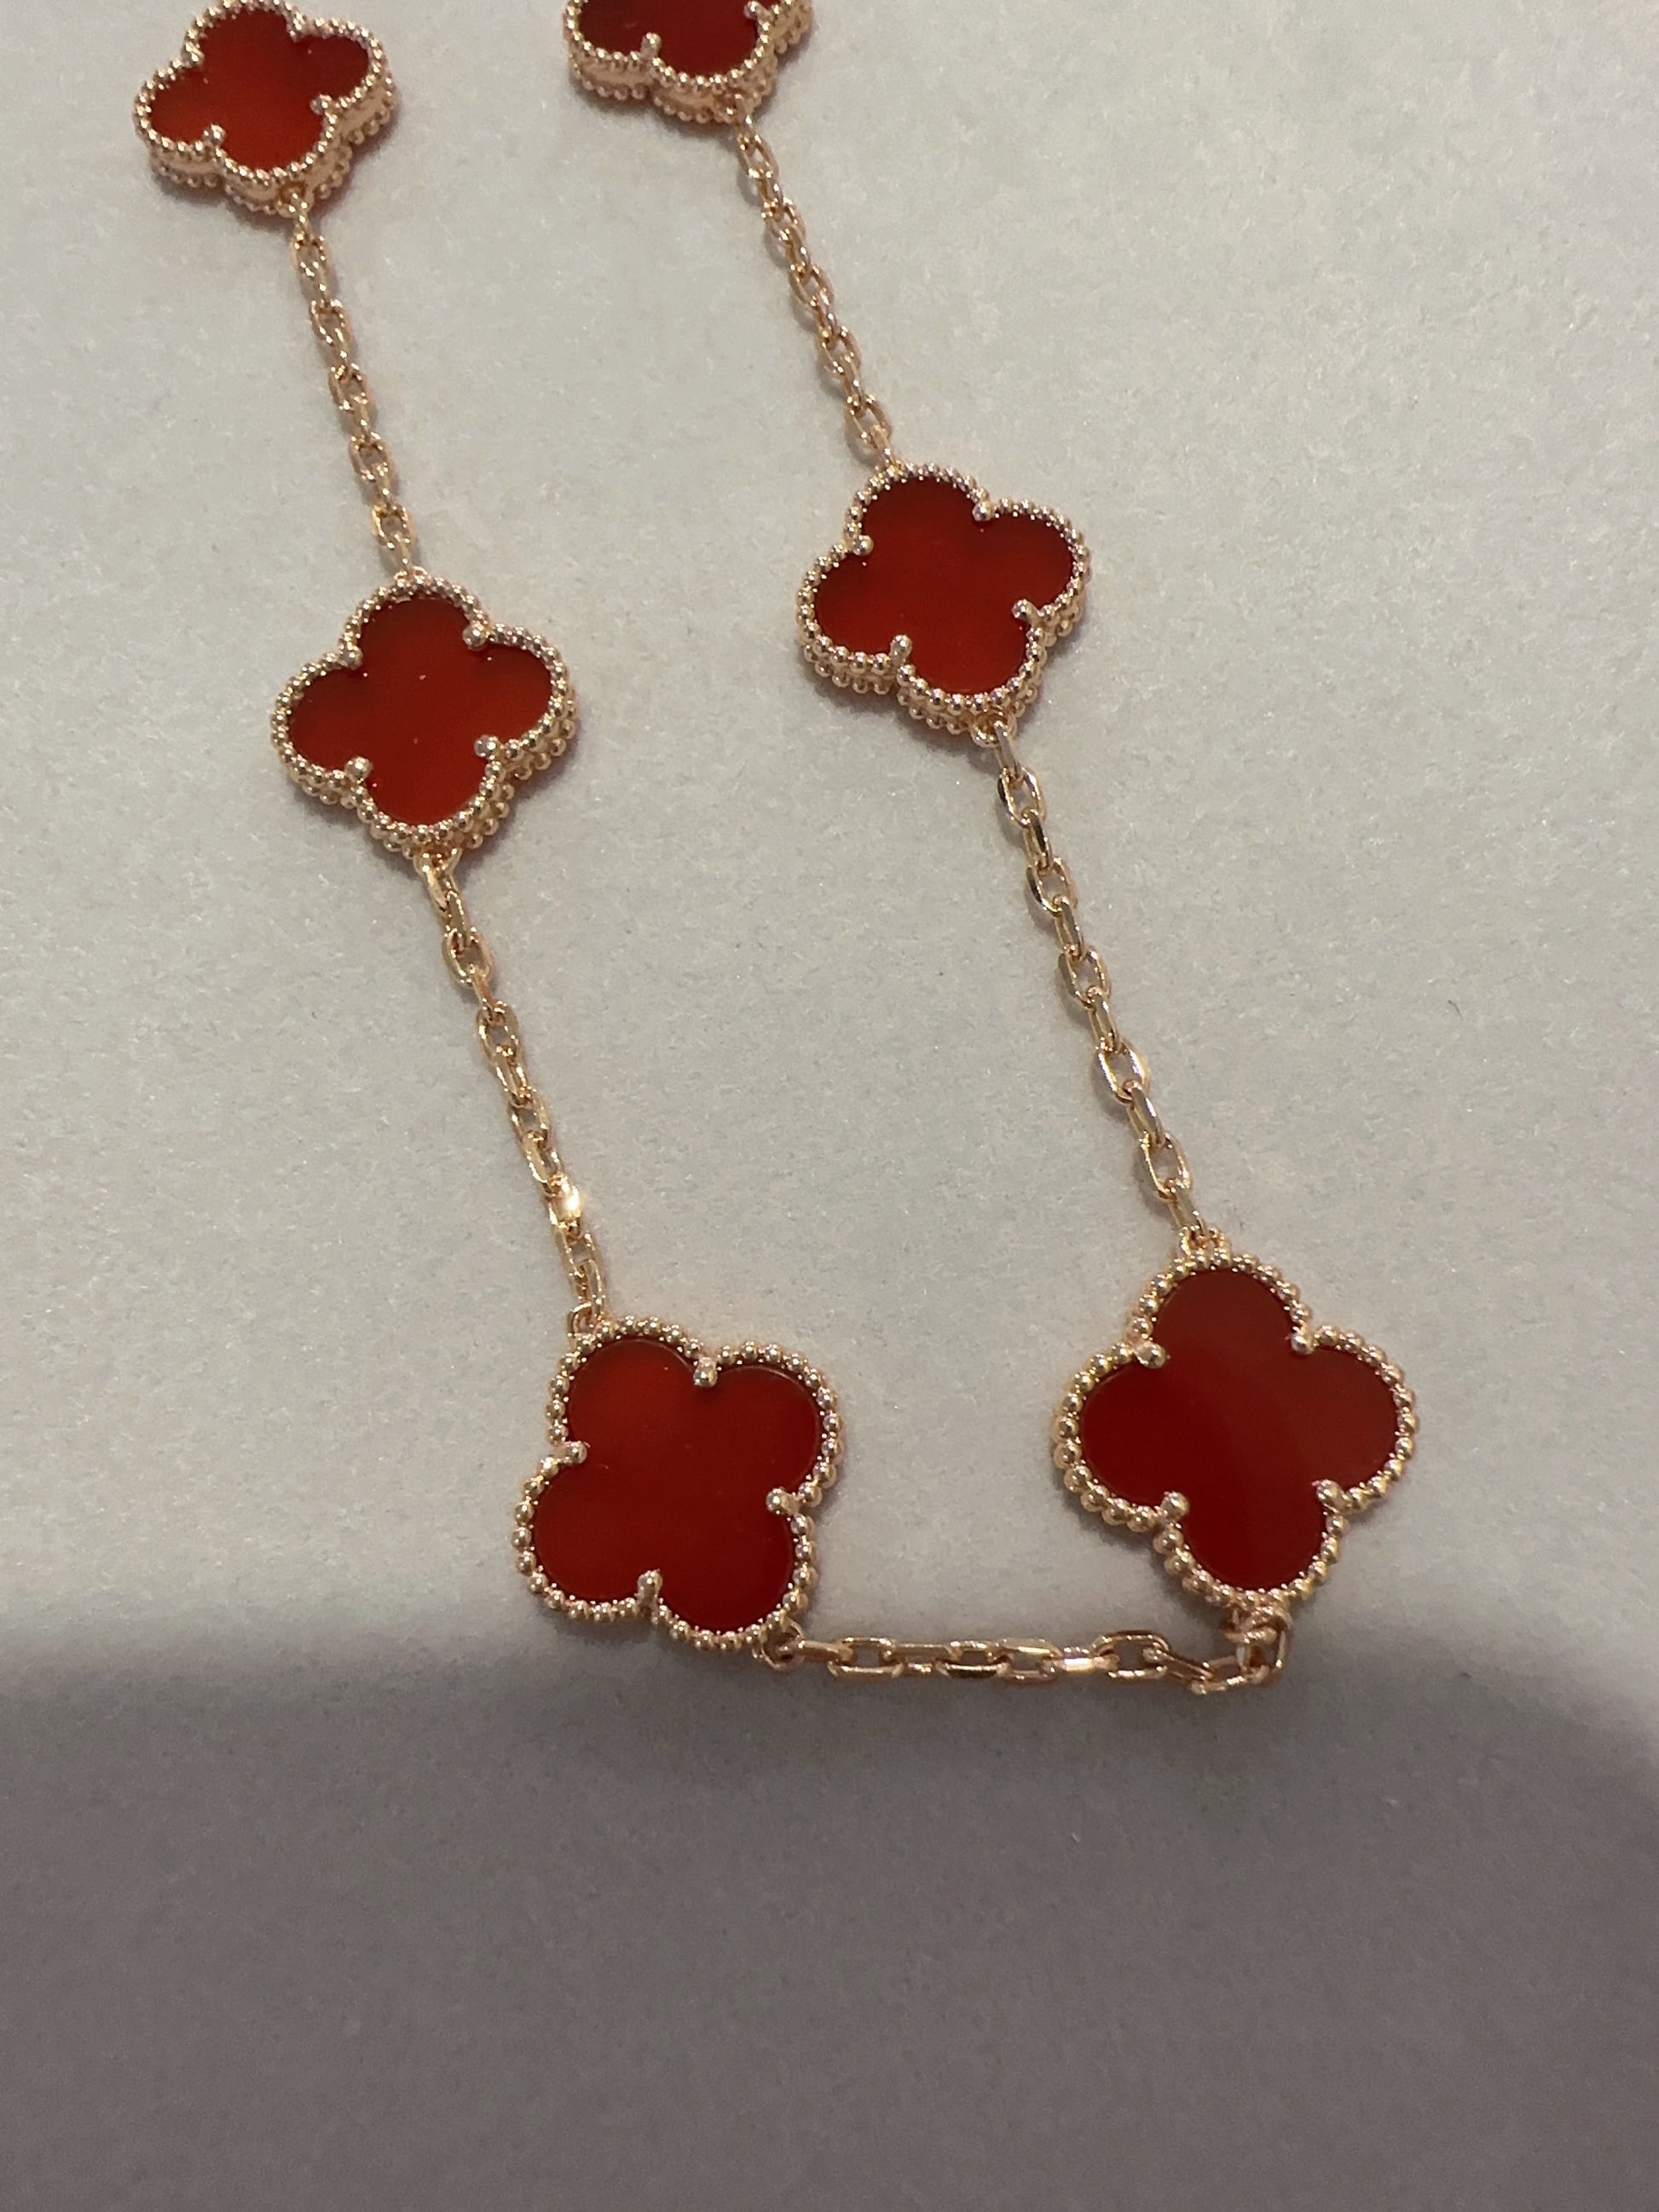 10 Red carnelian Rose Gold Plated Four Leaf Clover Flower Style S 925 Silver Necklace 16inches - ParadiseKissCo